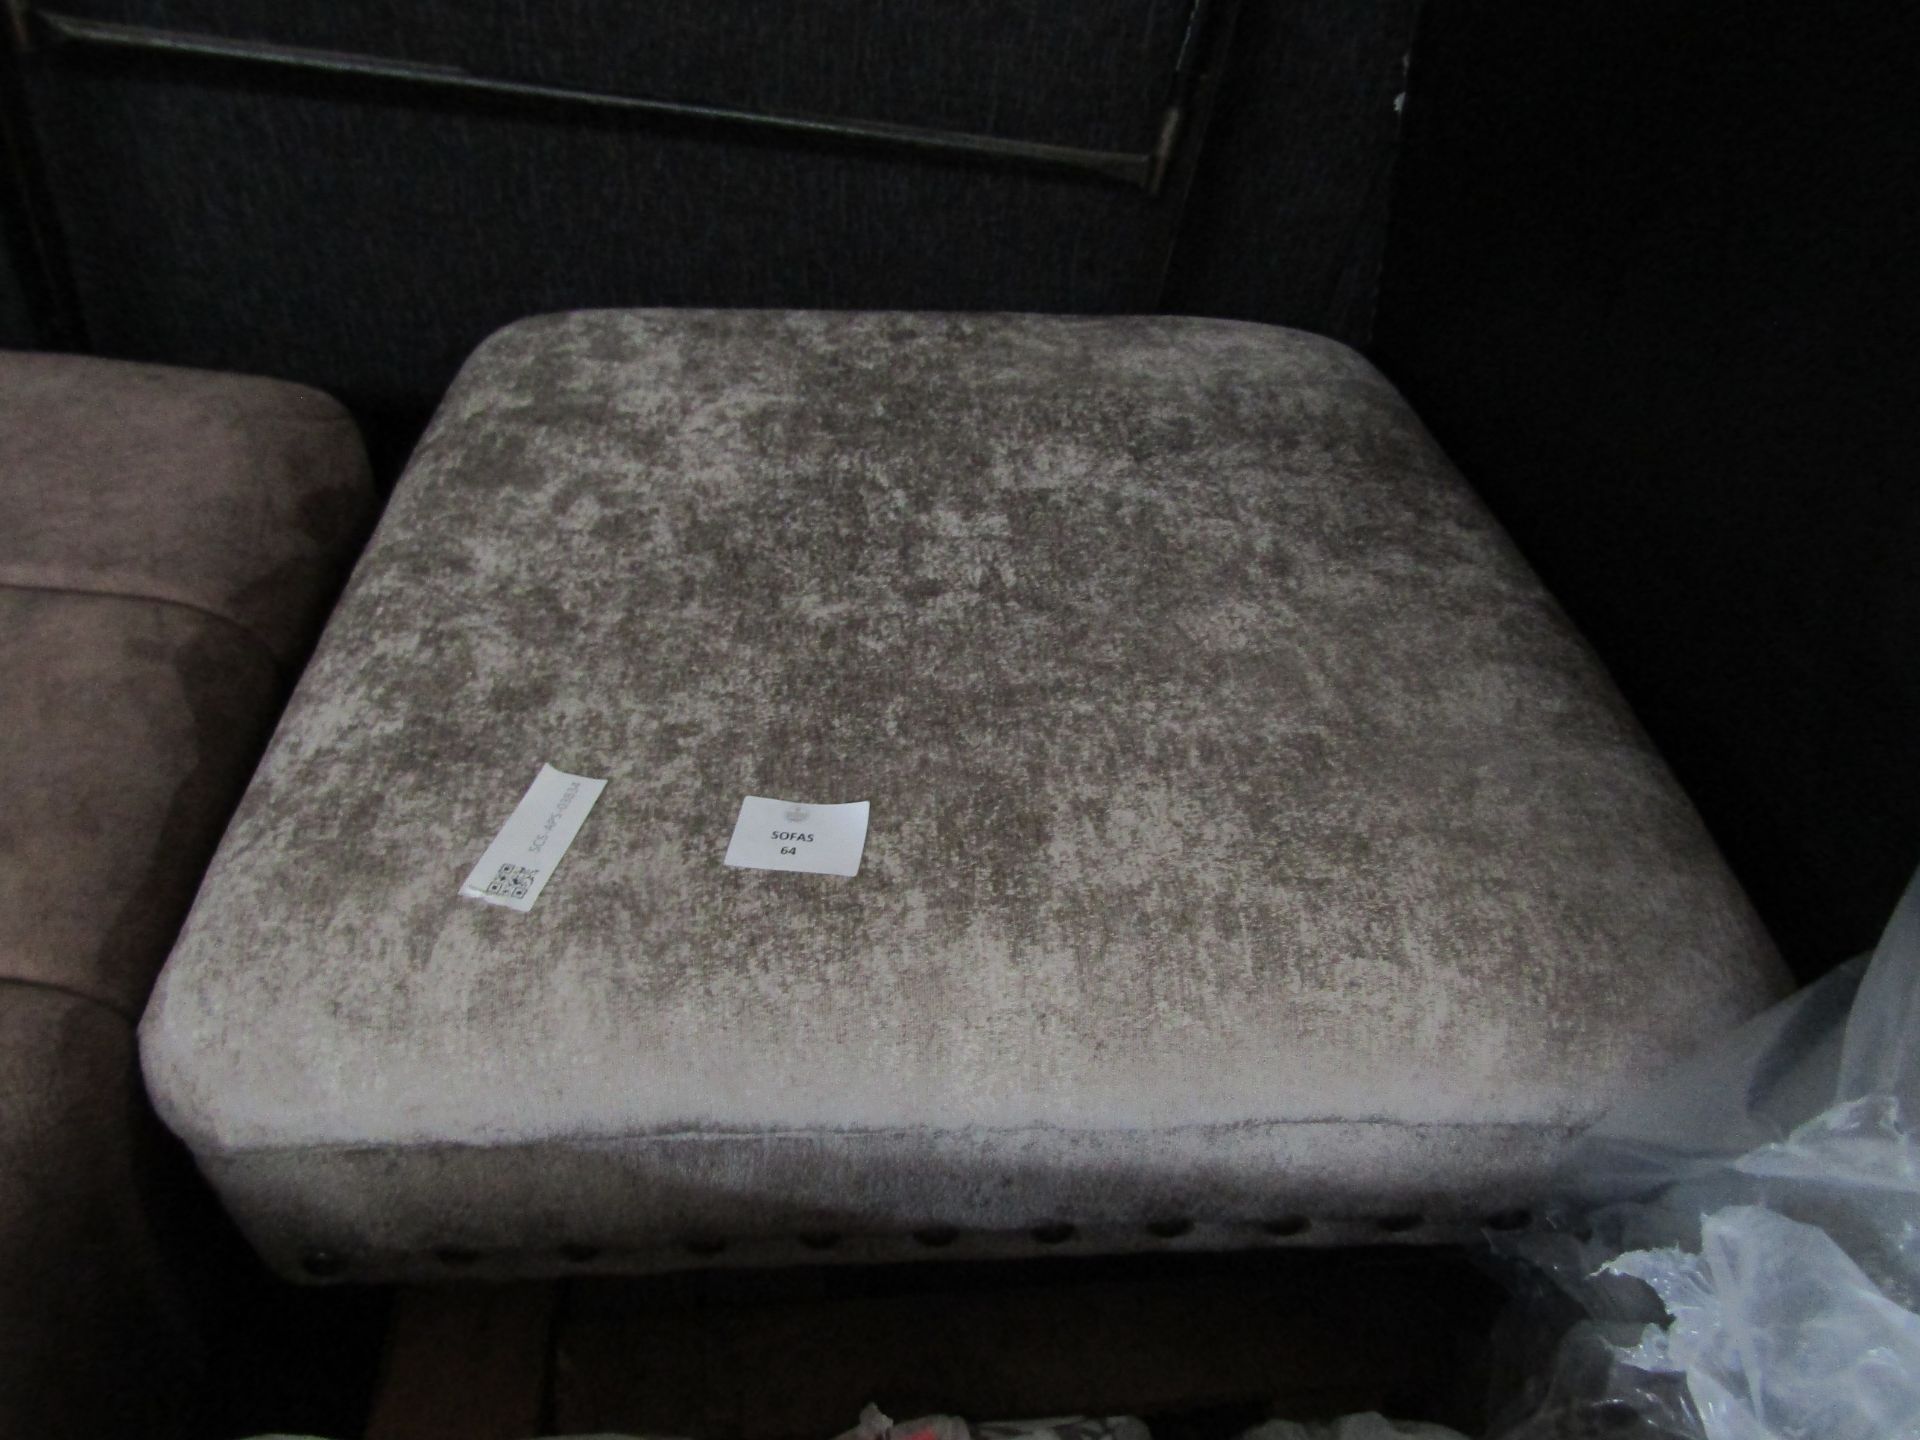 Rihanna Plain Top Footstool Hardwick Grey All Over Mahogany Effect Studs Foam RRP 300 About the - Image 2 of 2